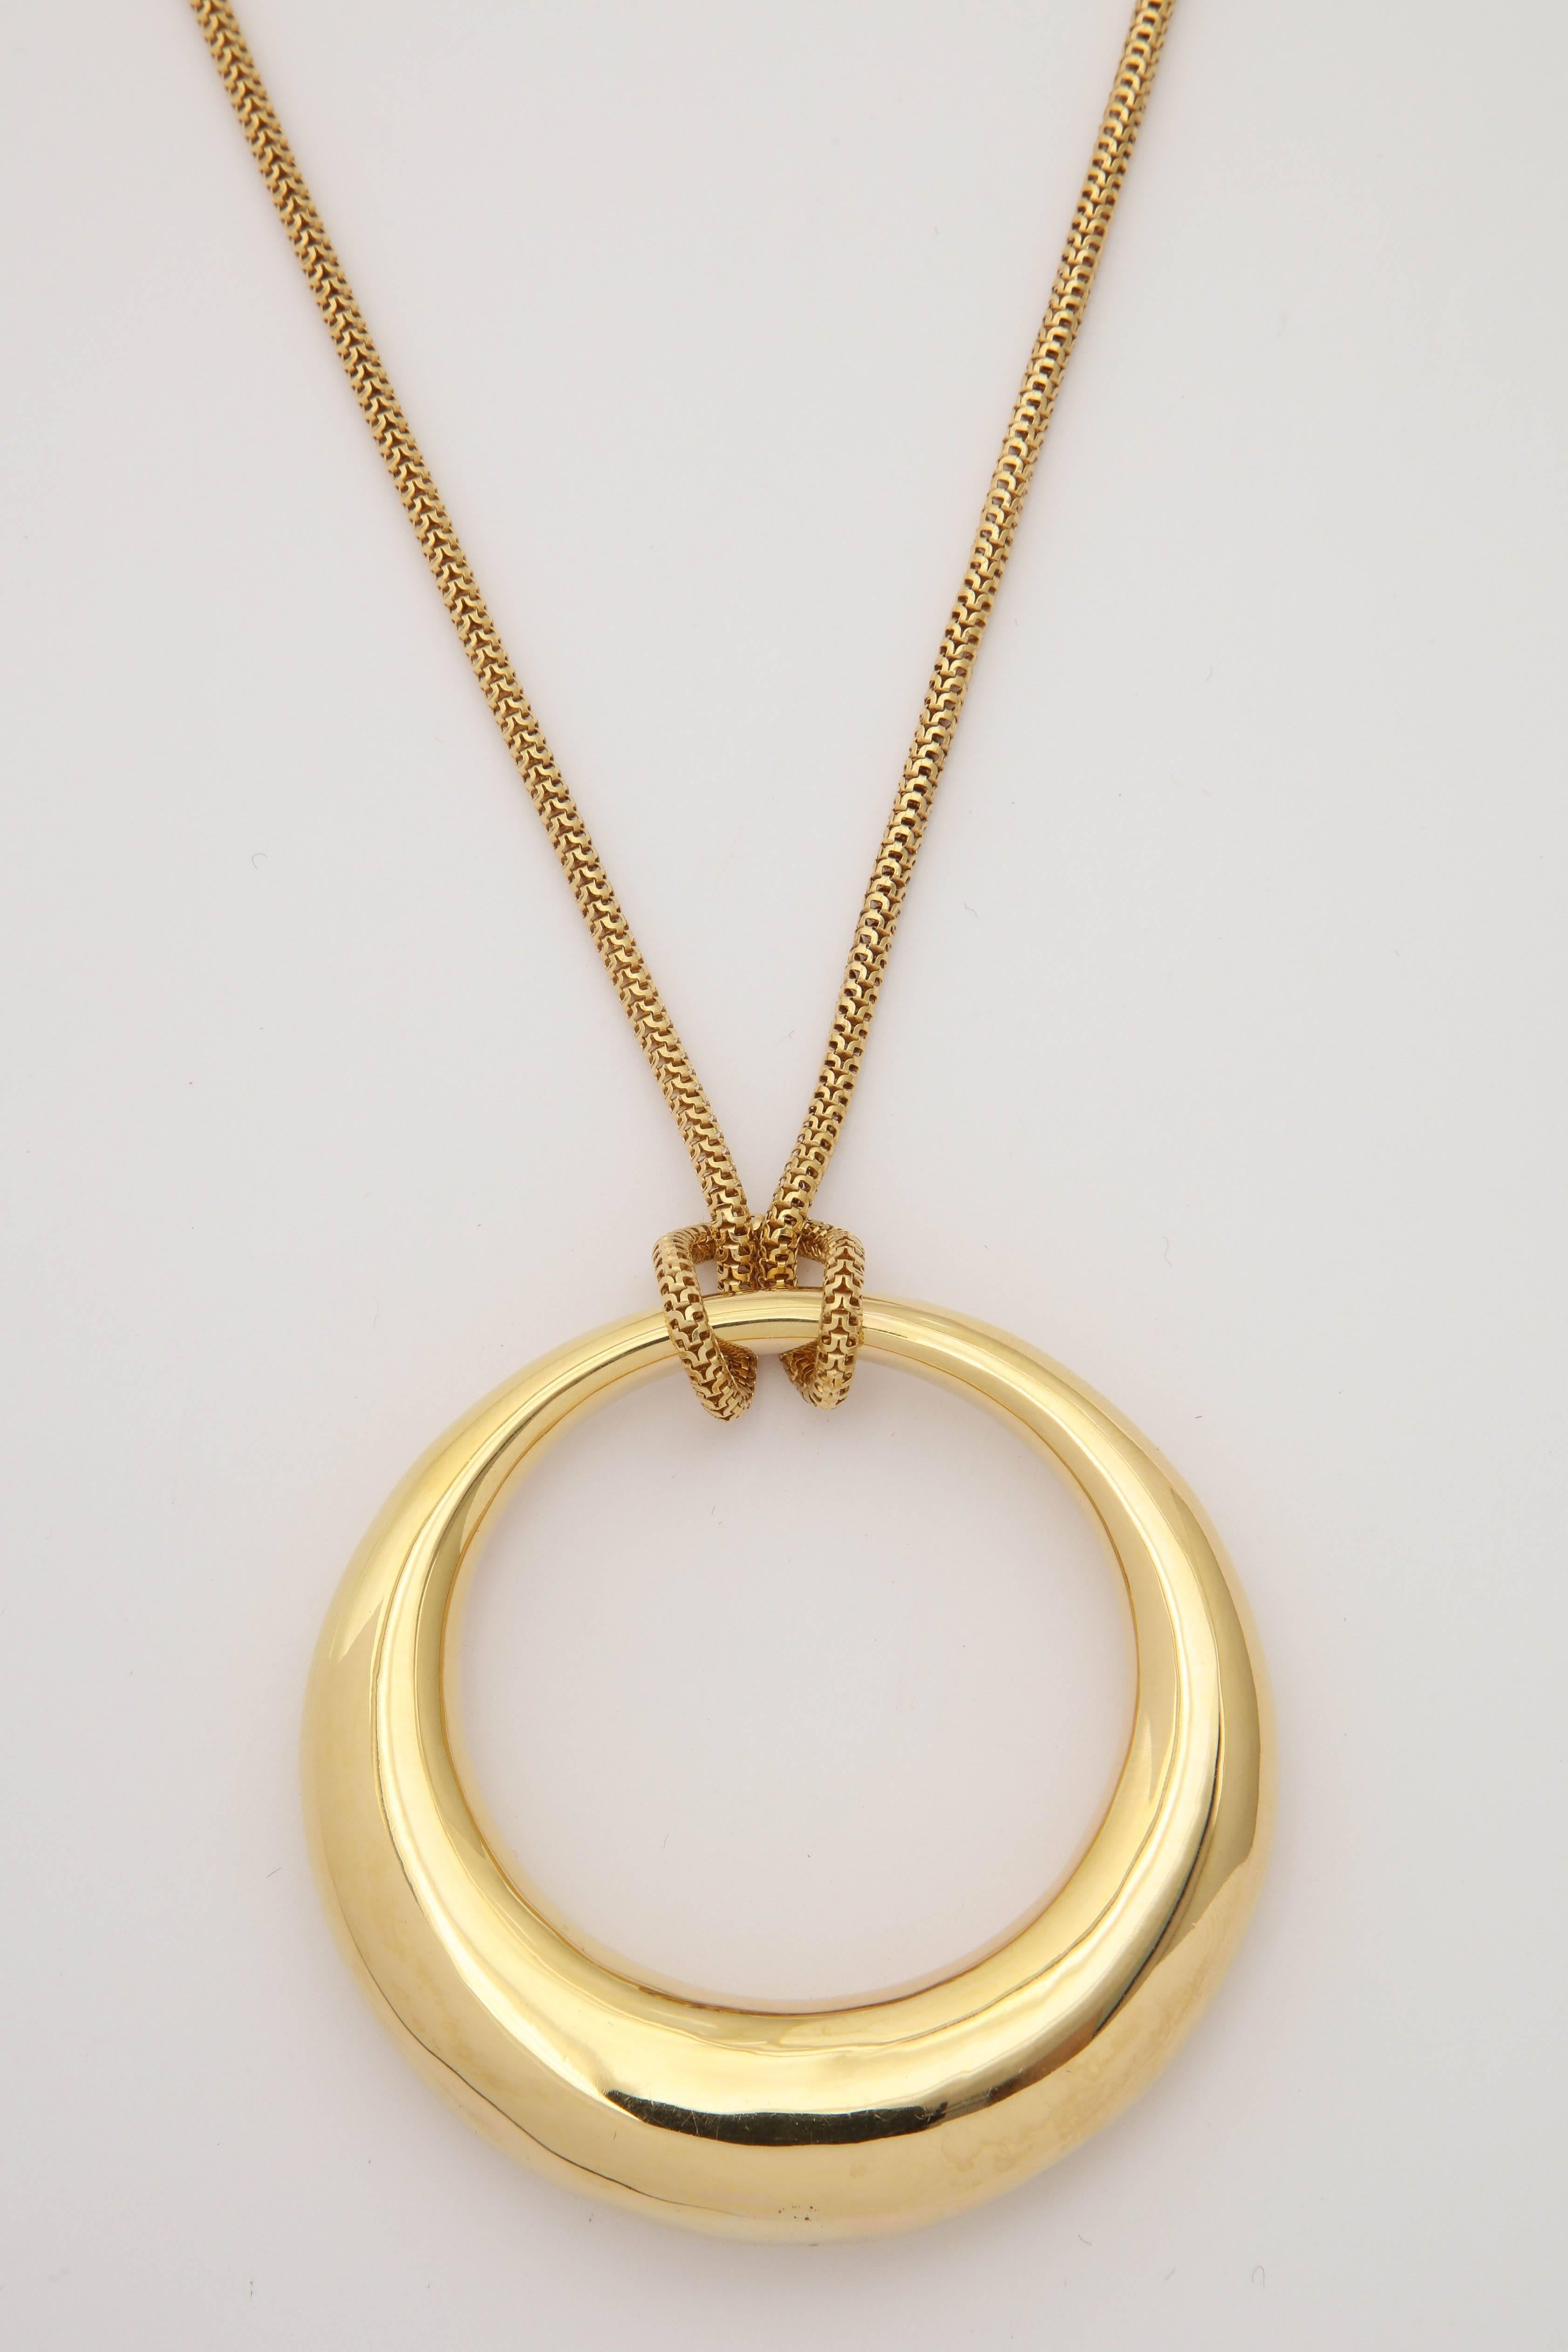 Women's or Men's 1980s Oblong Shaped Circle Pendant Wrapped in Reptile Box Link Gold Chain